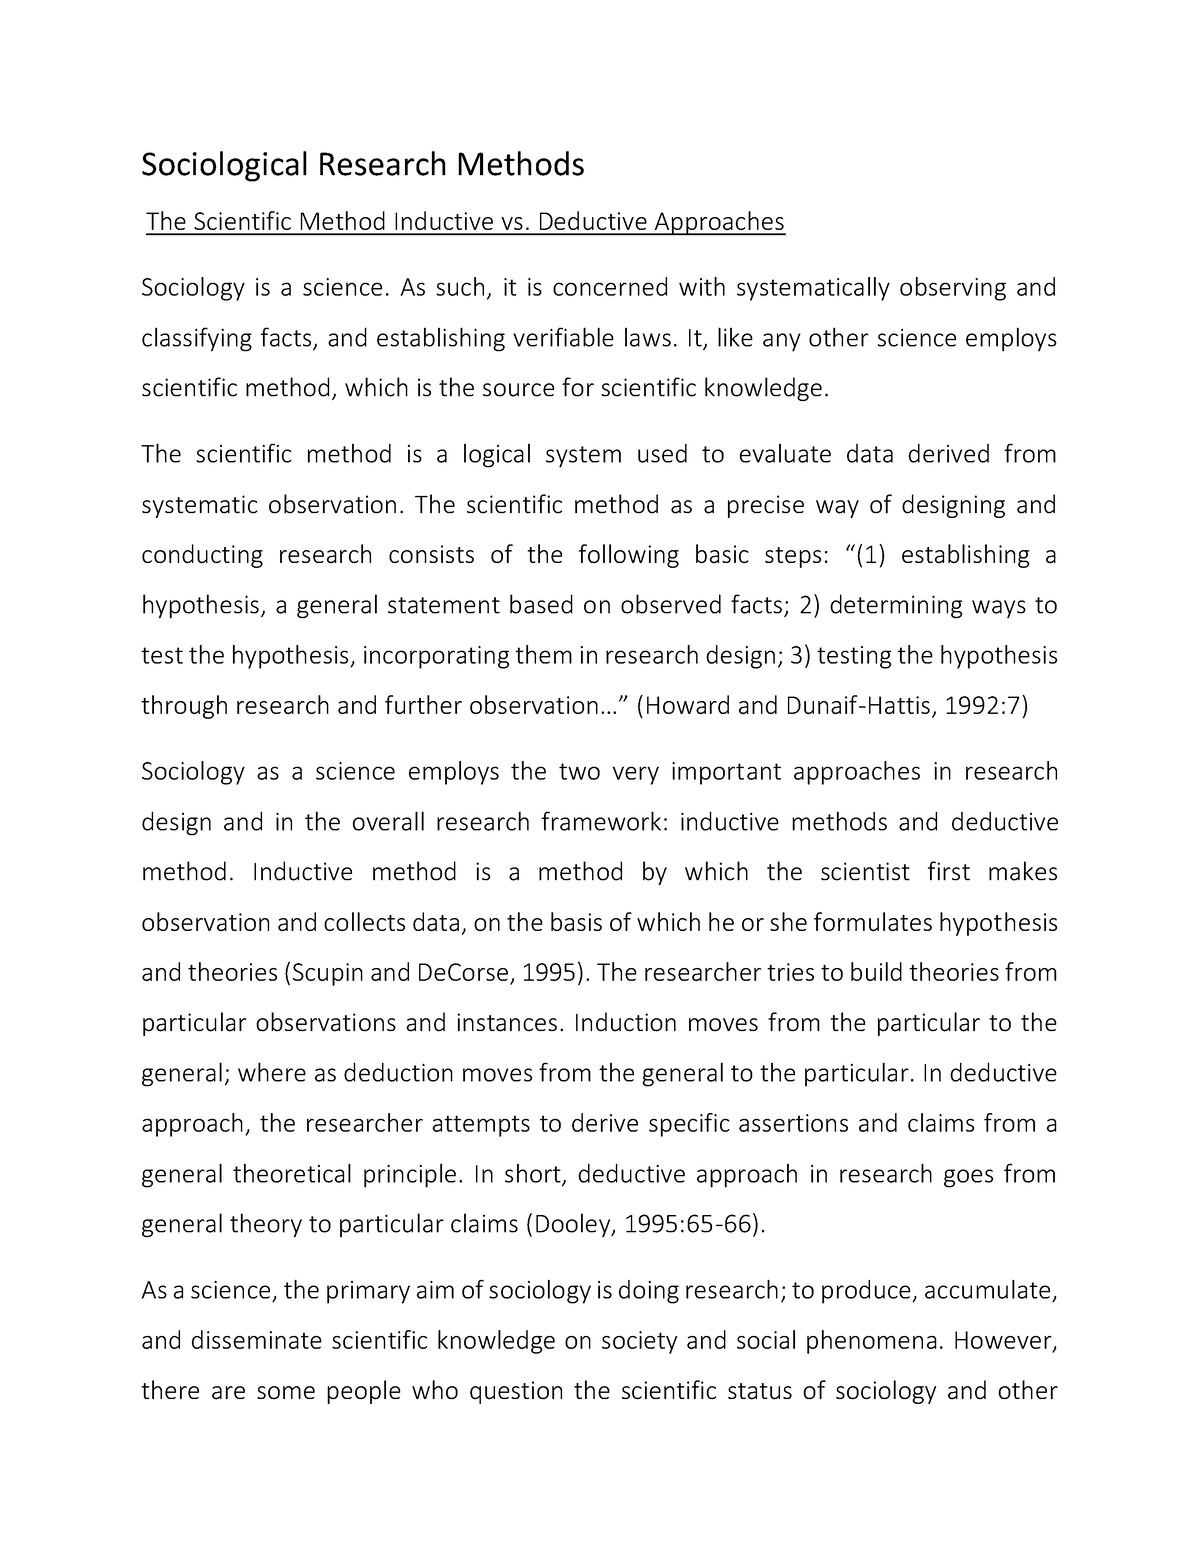 Sociological Research Methods Sociological Research Methods The Scientific Method Inductive Vs 